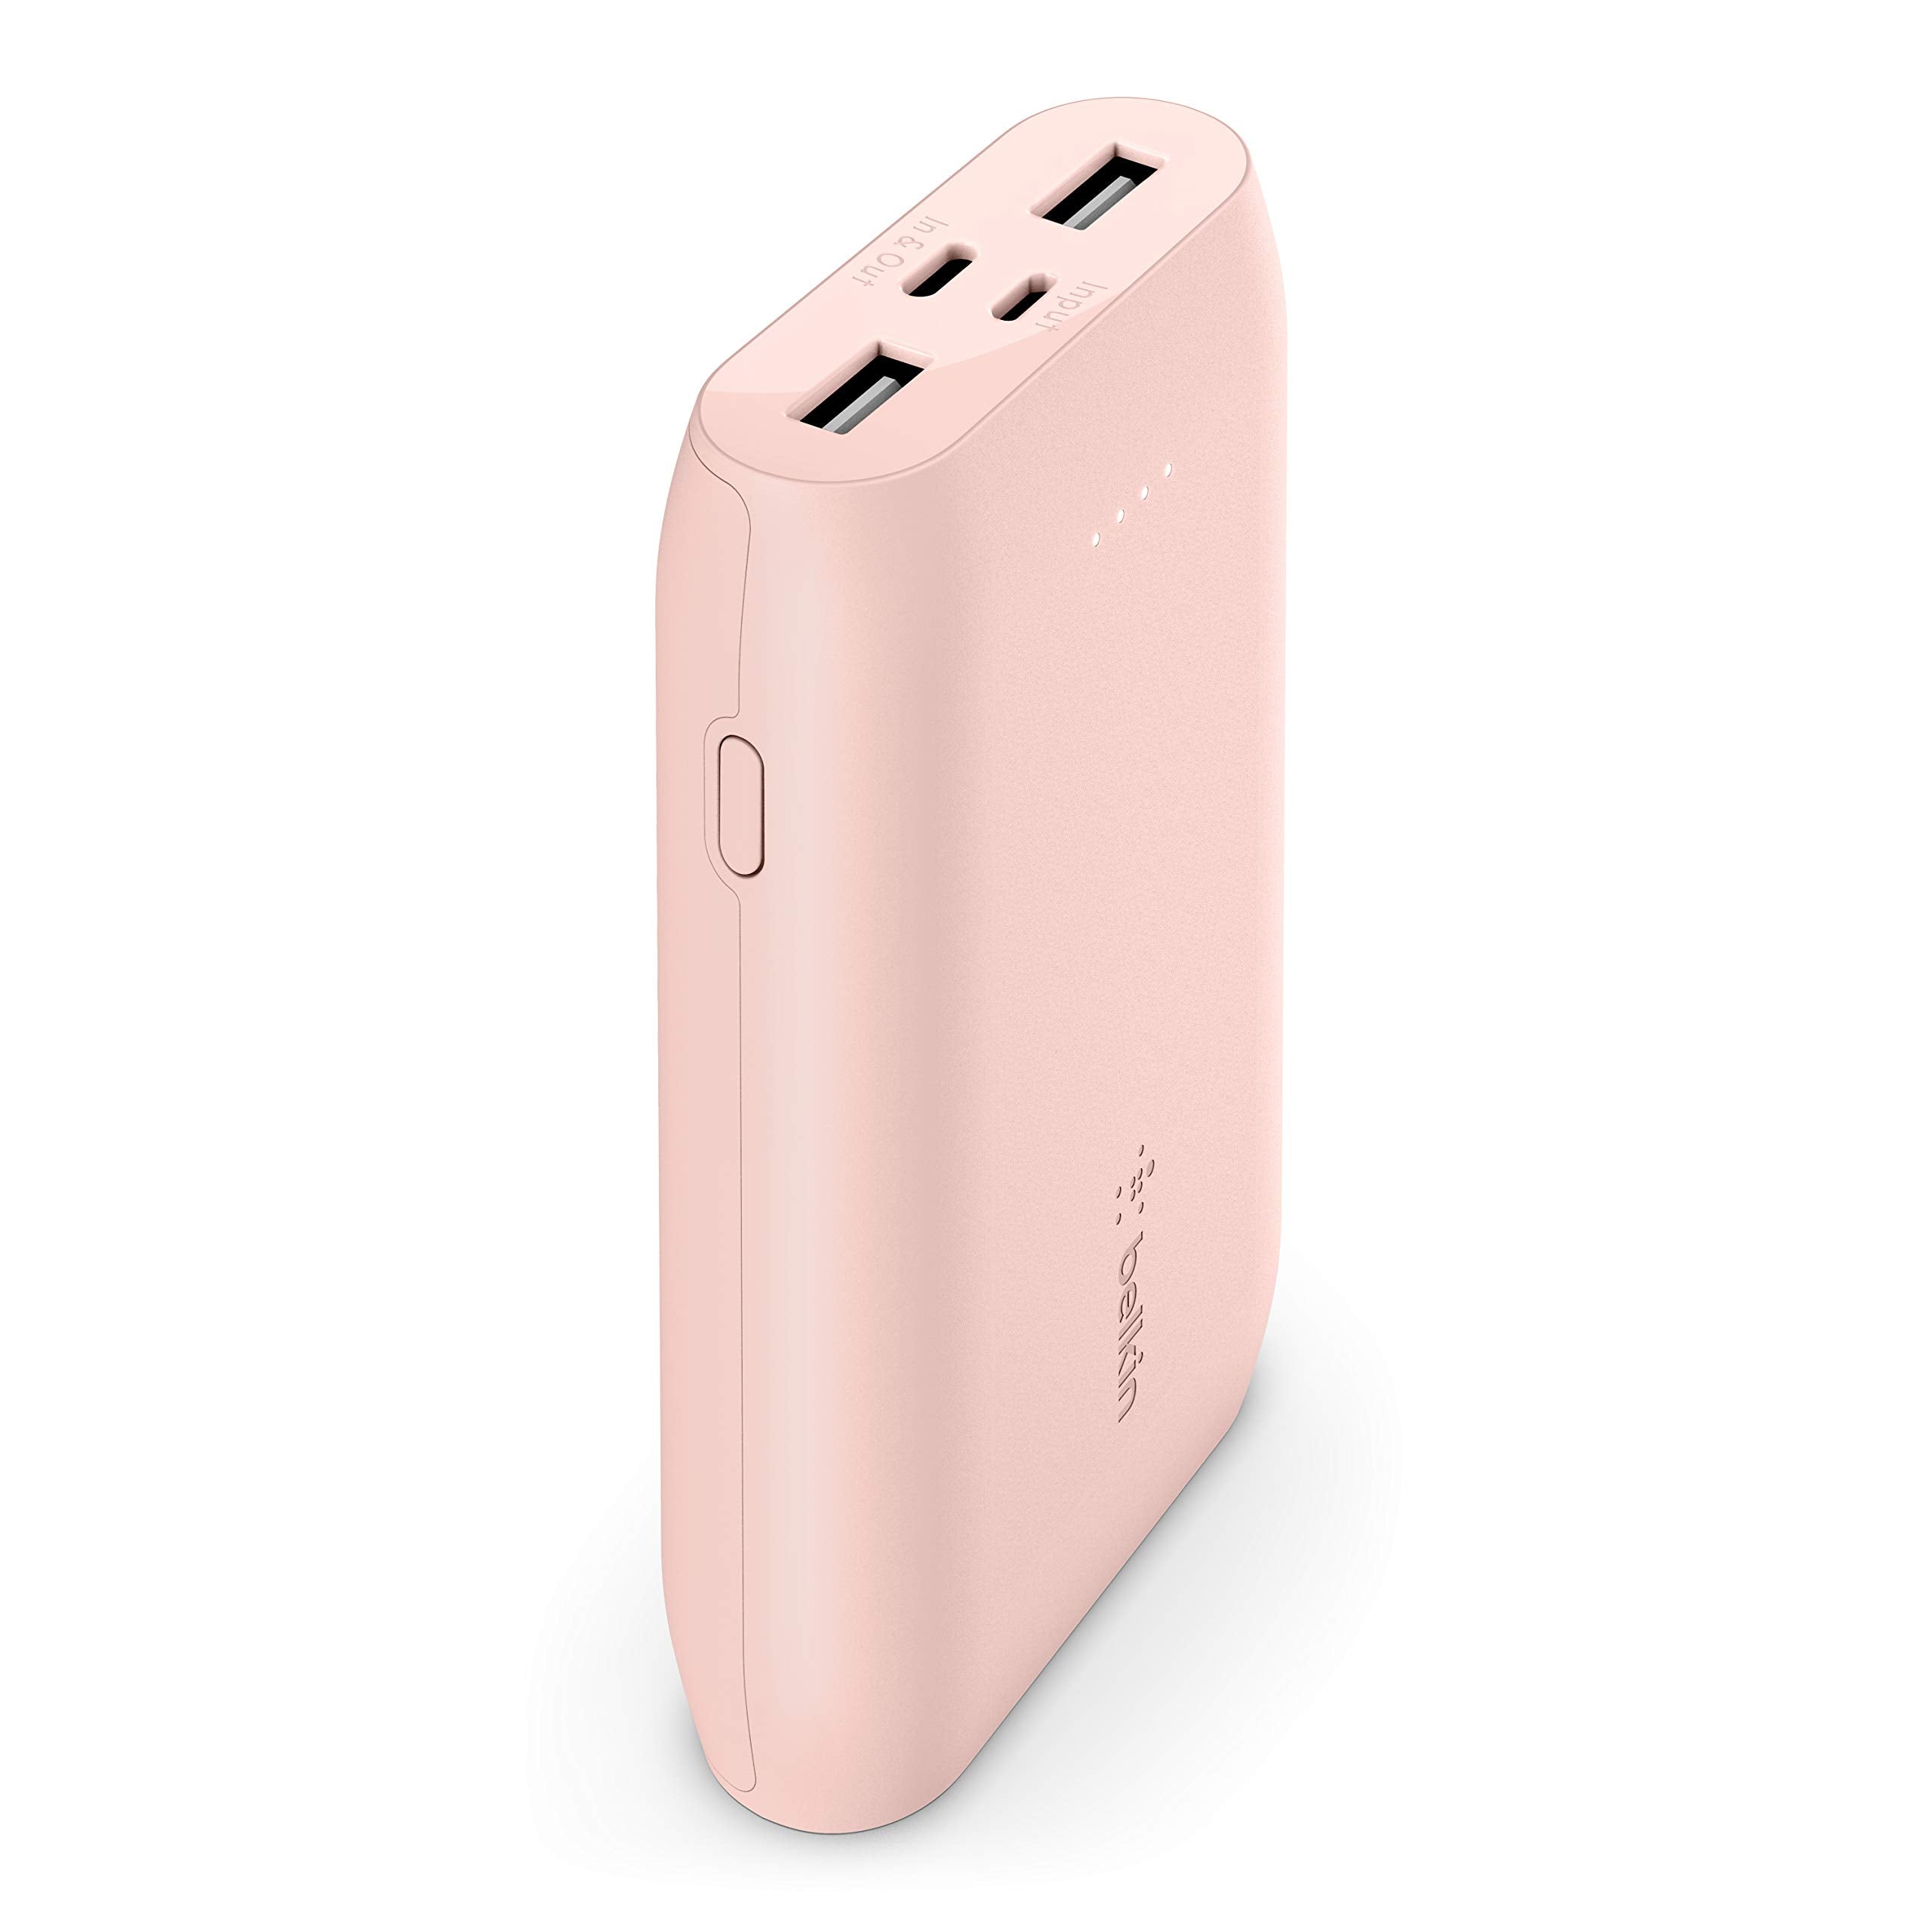 Belkin Portable Power Bank Charger 10K (Portable Charger Battery Pack w/ USB-C + Dual USB Ports, 10000mAh Capacity, for iPhone, AirPods, iPad, Galaxy S22 and more) – Rose Gold